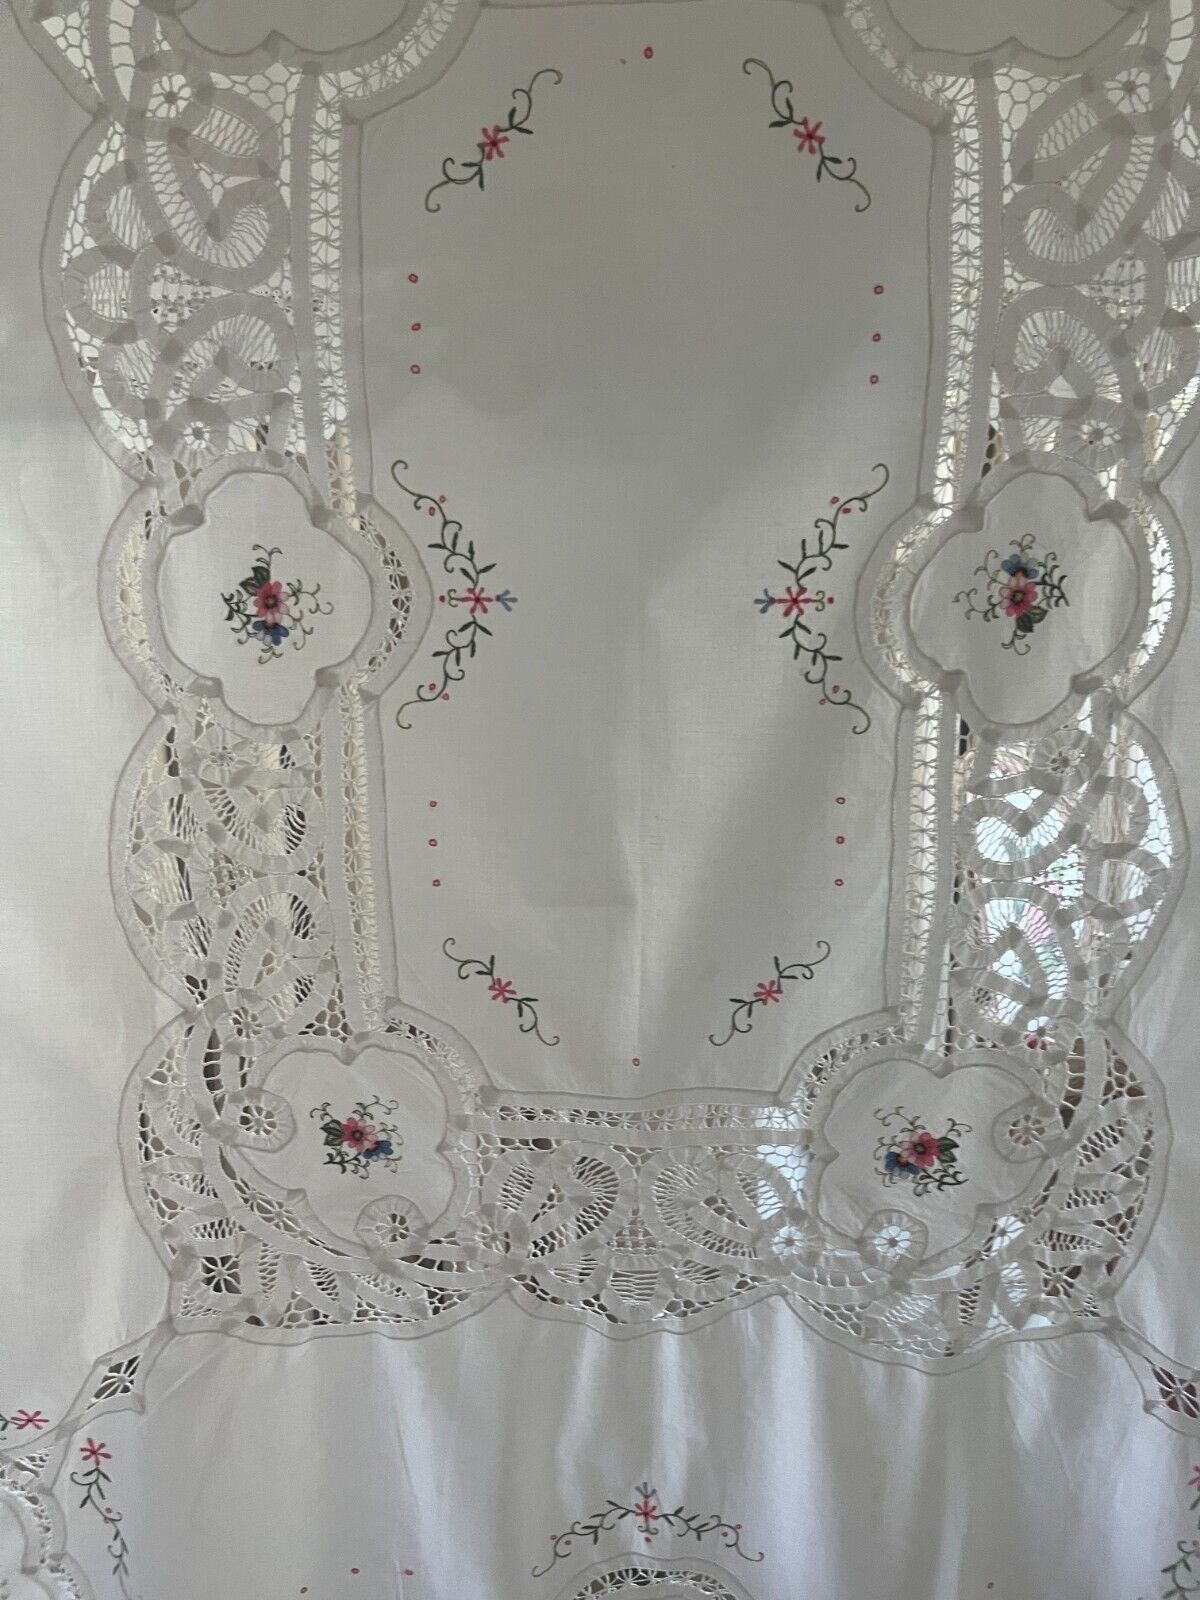 Vintage Embroidered White Tablecloth Battenburg Lace 53